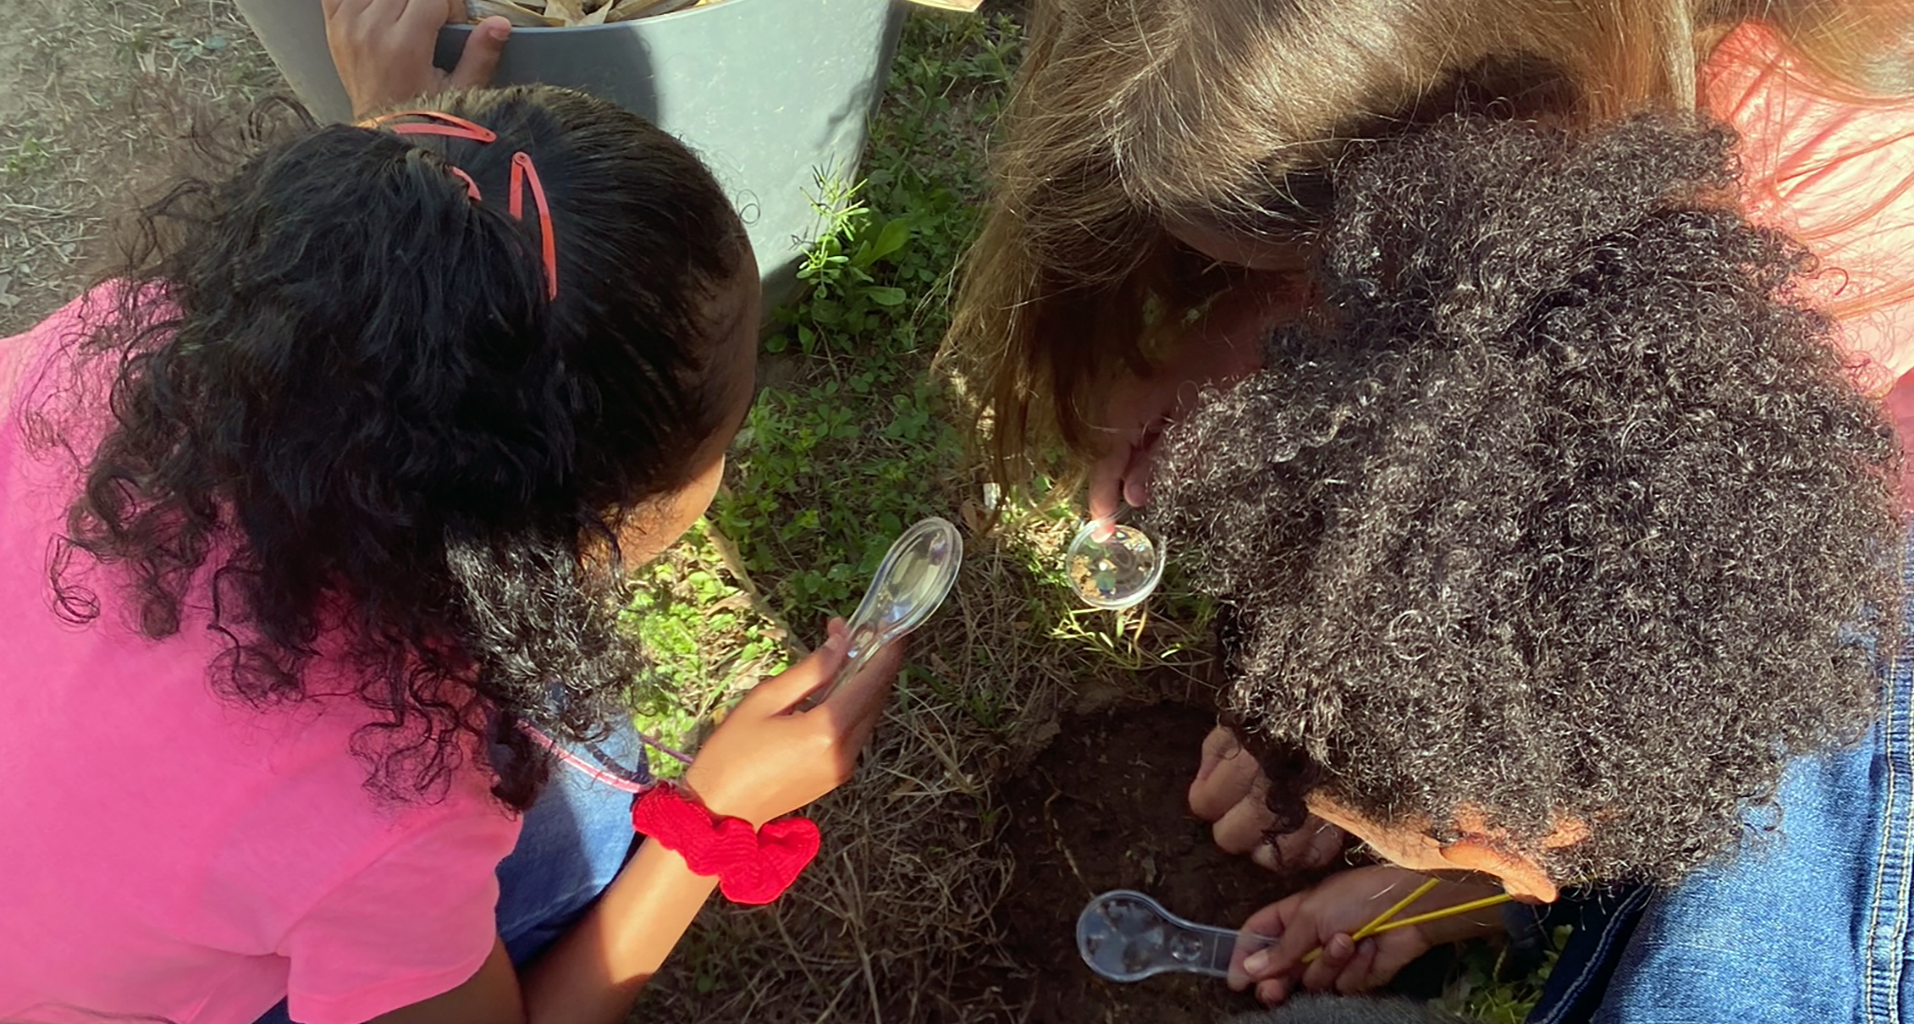 Three students examining the ground with magnifying glasses.